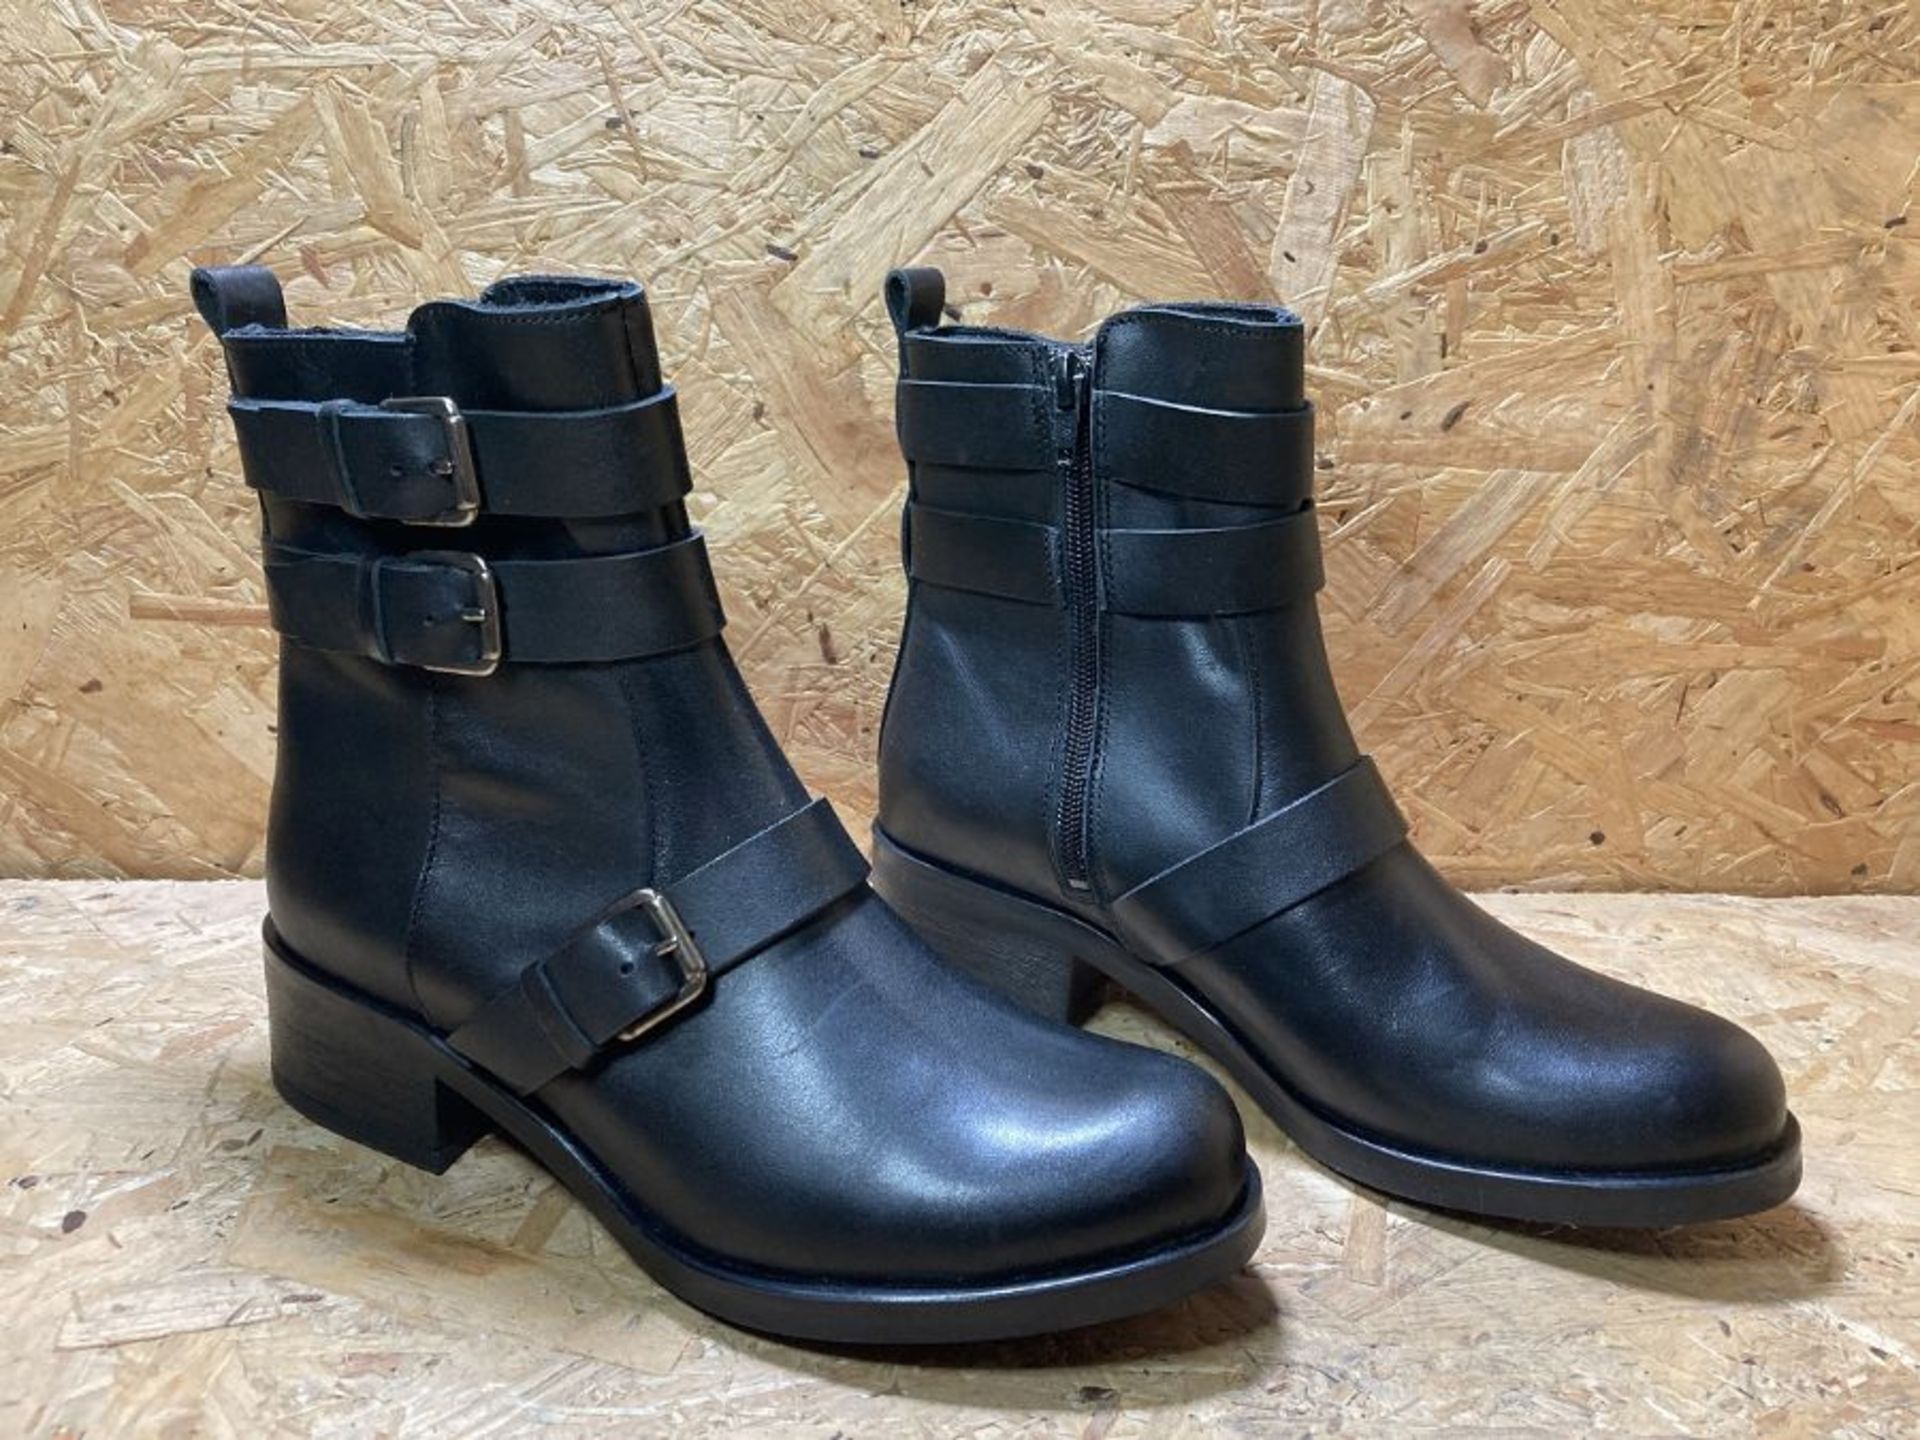 1 X LA REDOUTE COLLECTIONS LEATHER BIKER ANKLE BOOTS WITH TRIPLE STRAP / SIZE: 37 EU / RRP £99.